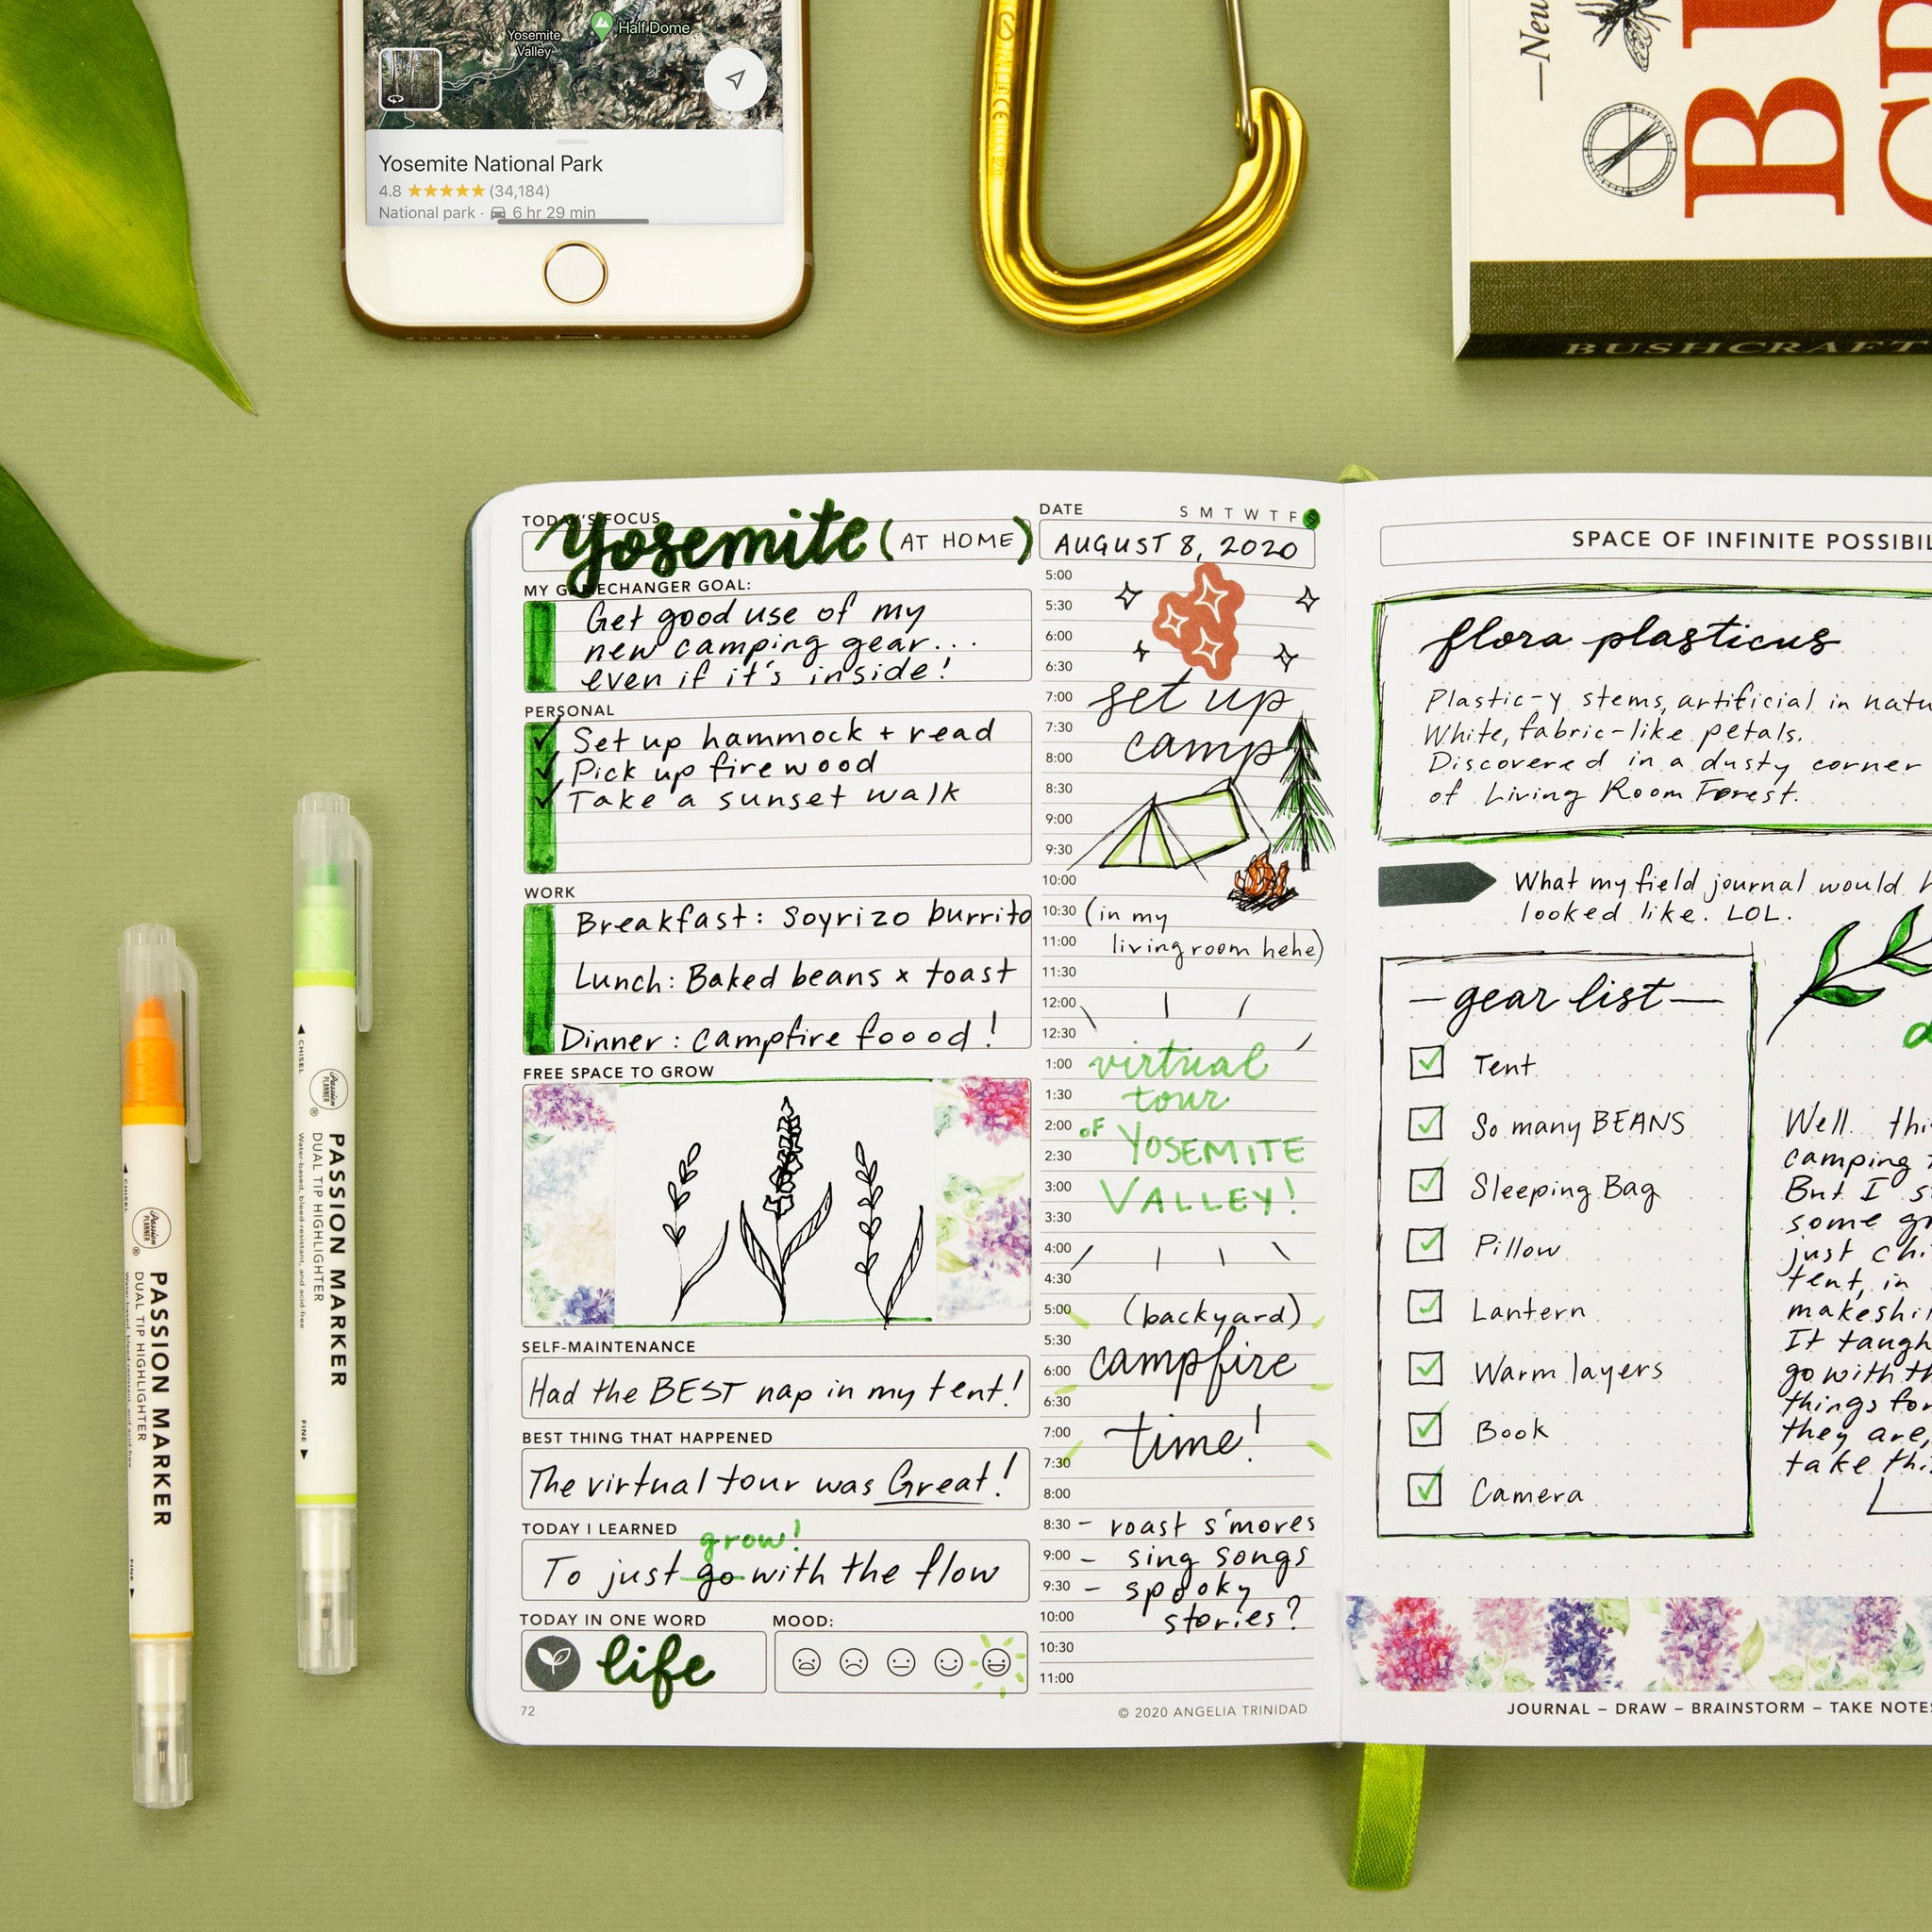 Yosemite staycation ideas written inside Passion Planner Daily against a green background with Passion Markers and climbing hooks. 